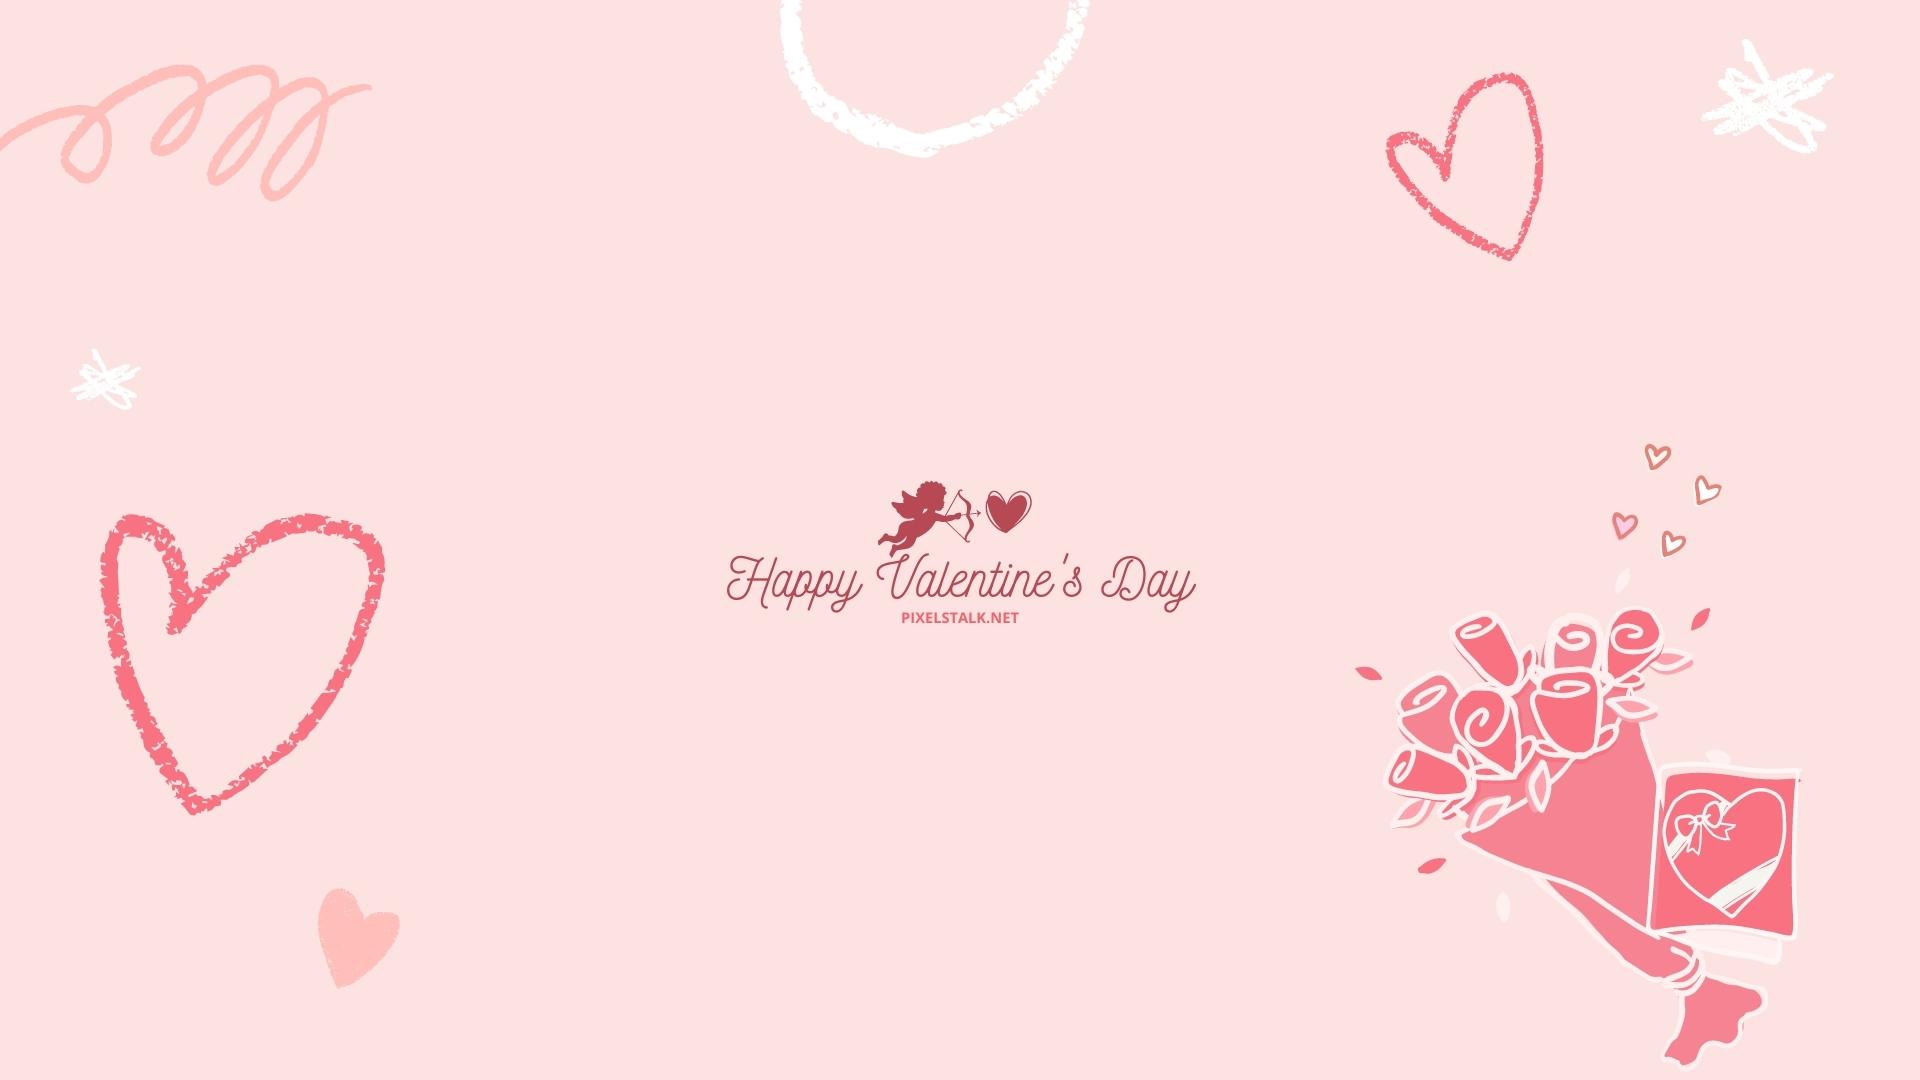 35 Desktop Wallpapers Tailored for Valentines Day